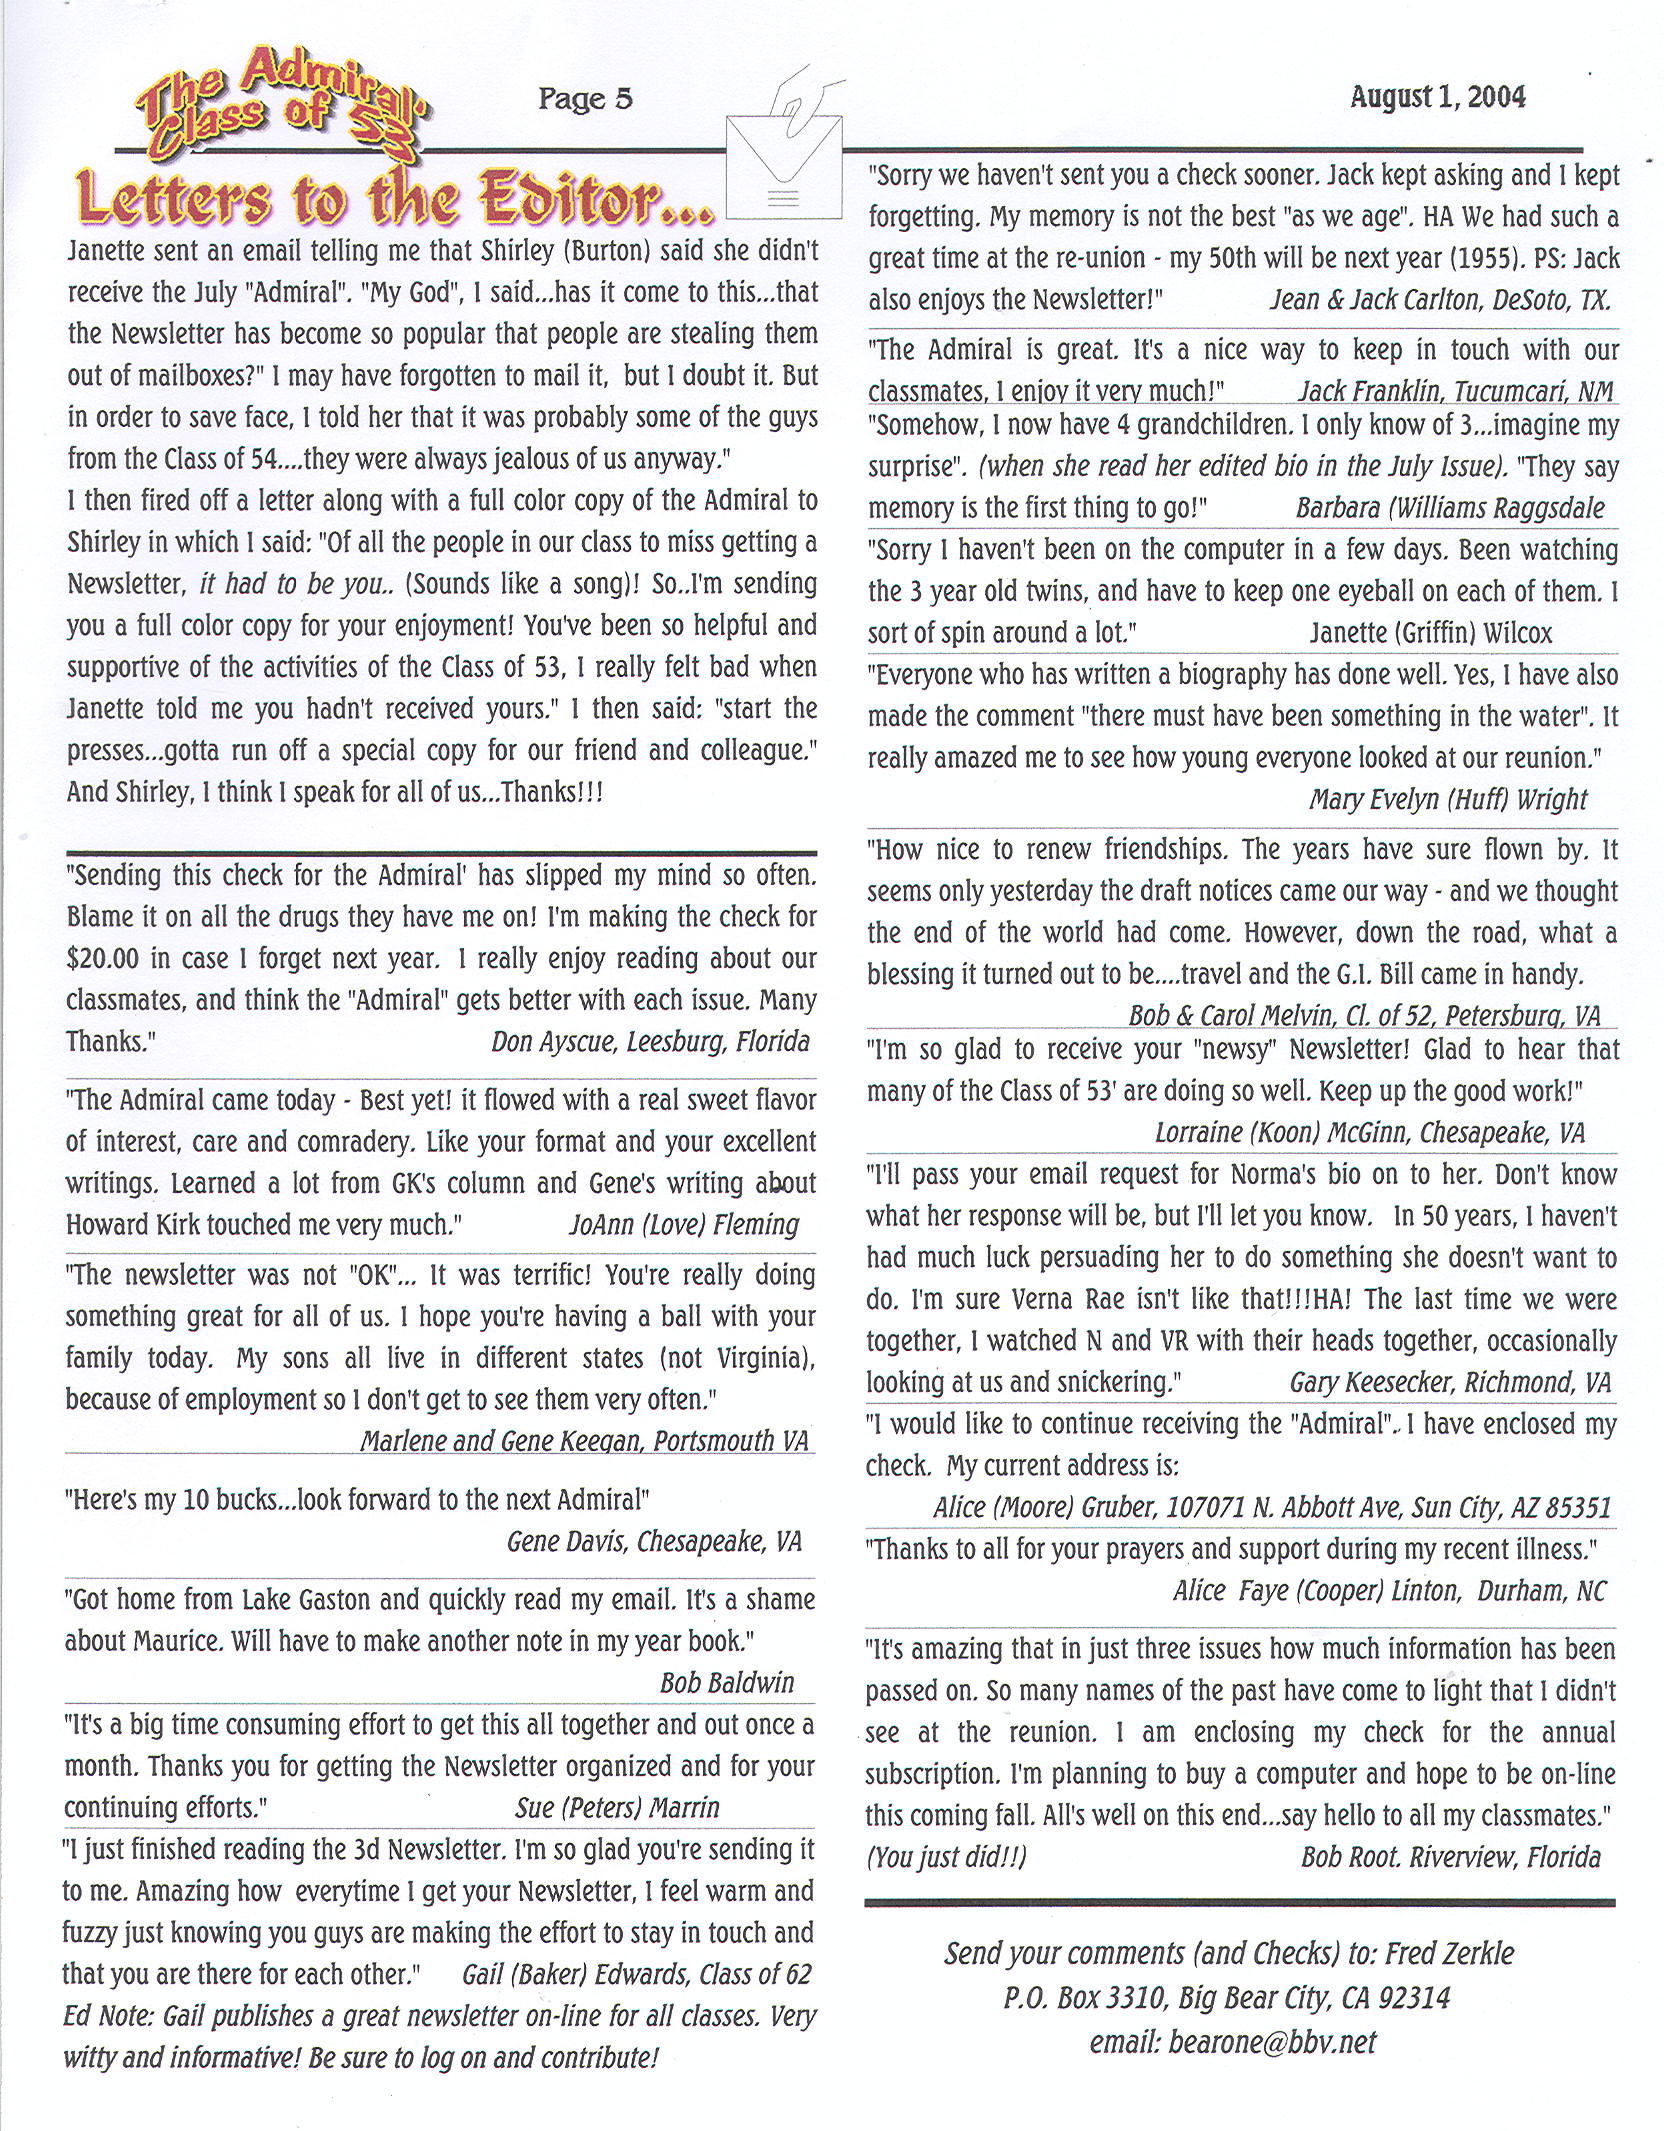 The Admiral - August 2004 - pg. 5